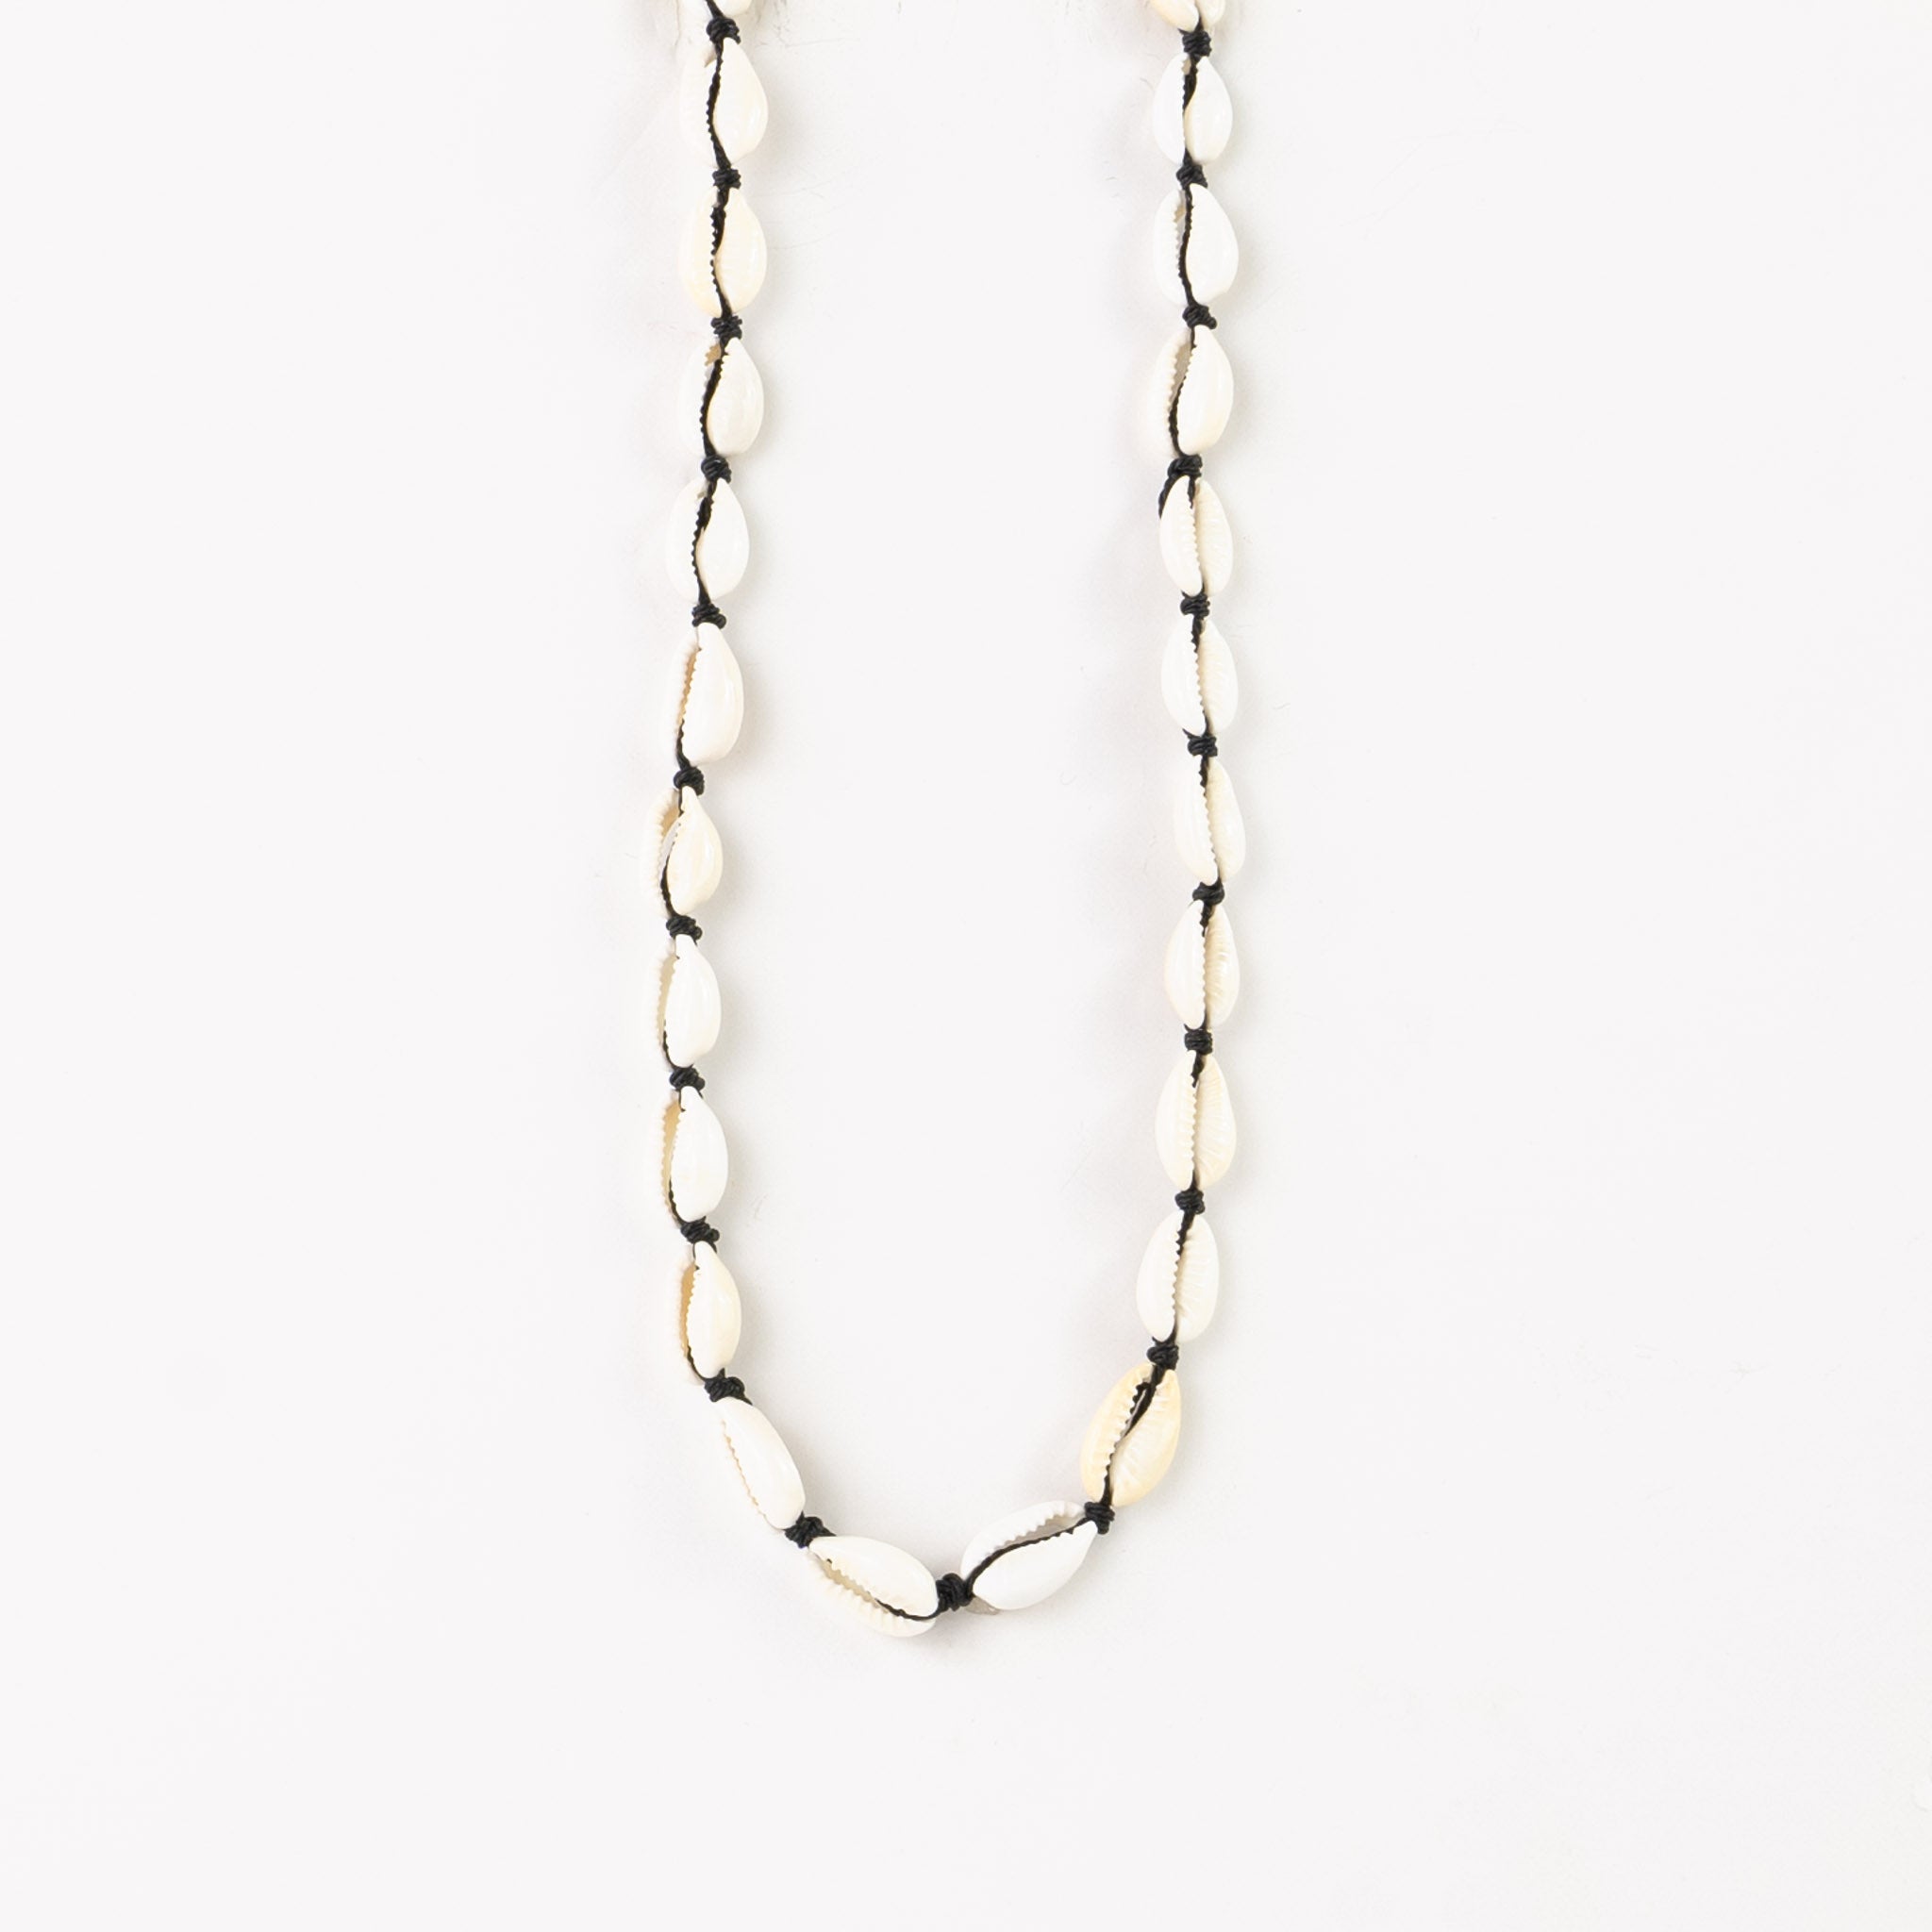 IMPERFECT Livadi Cowrie Shell Necklace - Pineapple Island